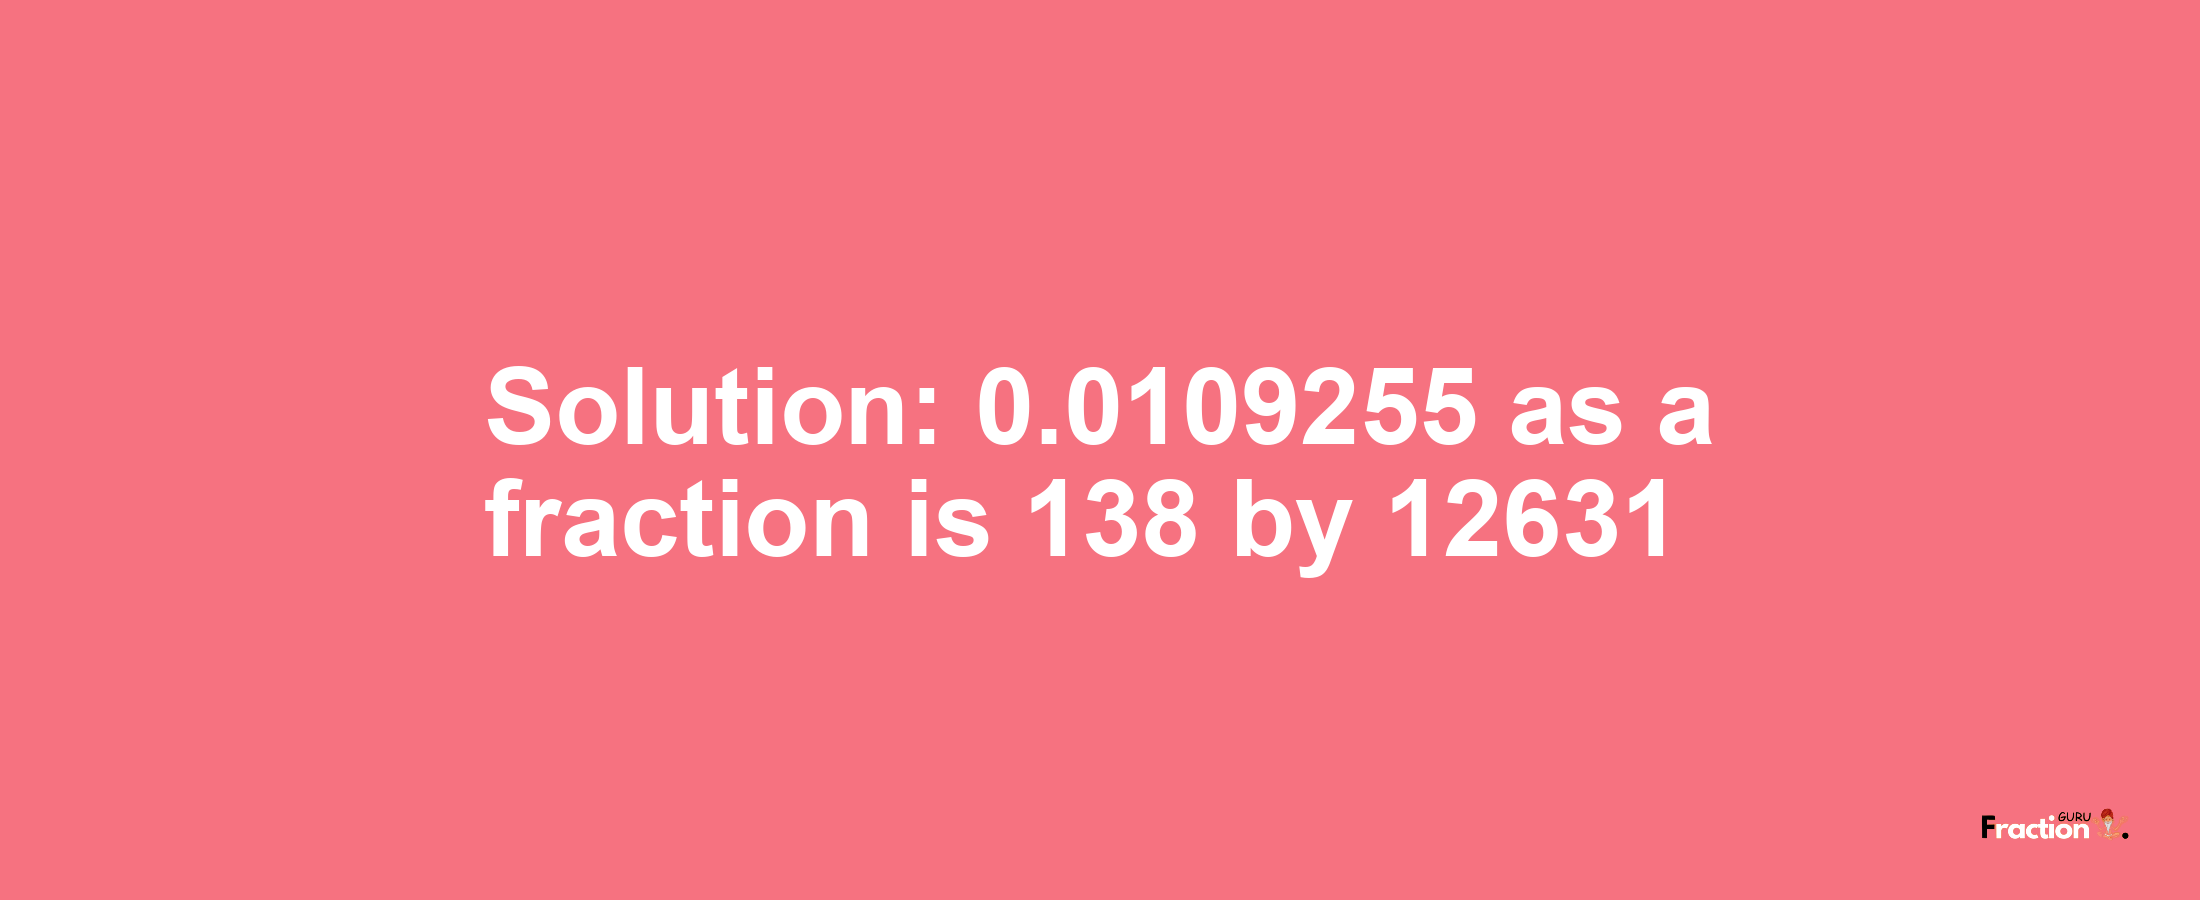 Solution:0.0109255 as a fraction is 138/12631